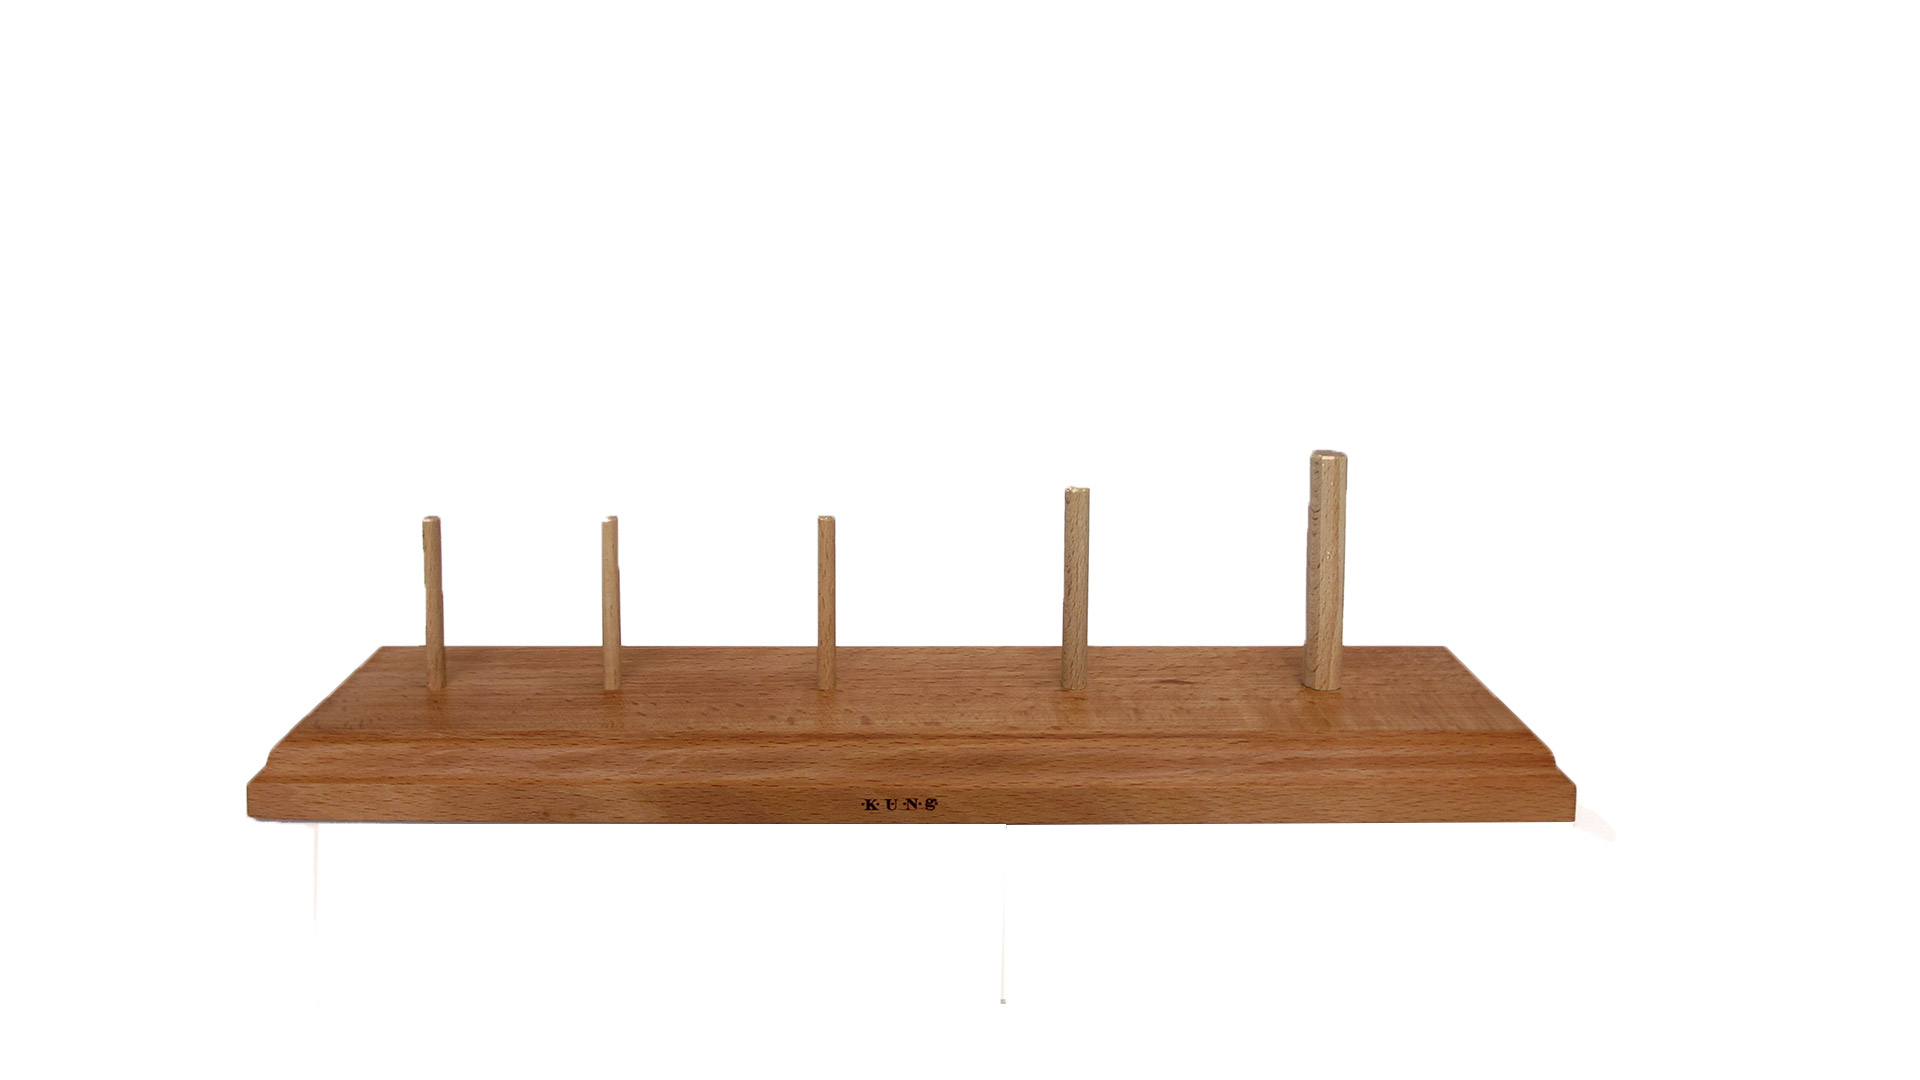 Küng, 5-piece stand (delivered with 7 pegs. Diameter: 2x 0,236 in, 4x 0,314, 1x 0,472 in)